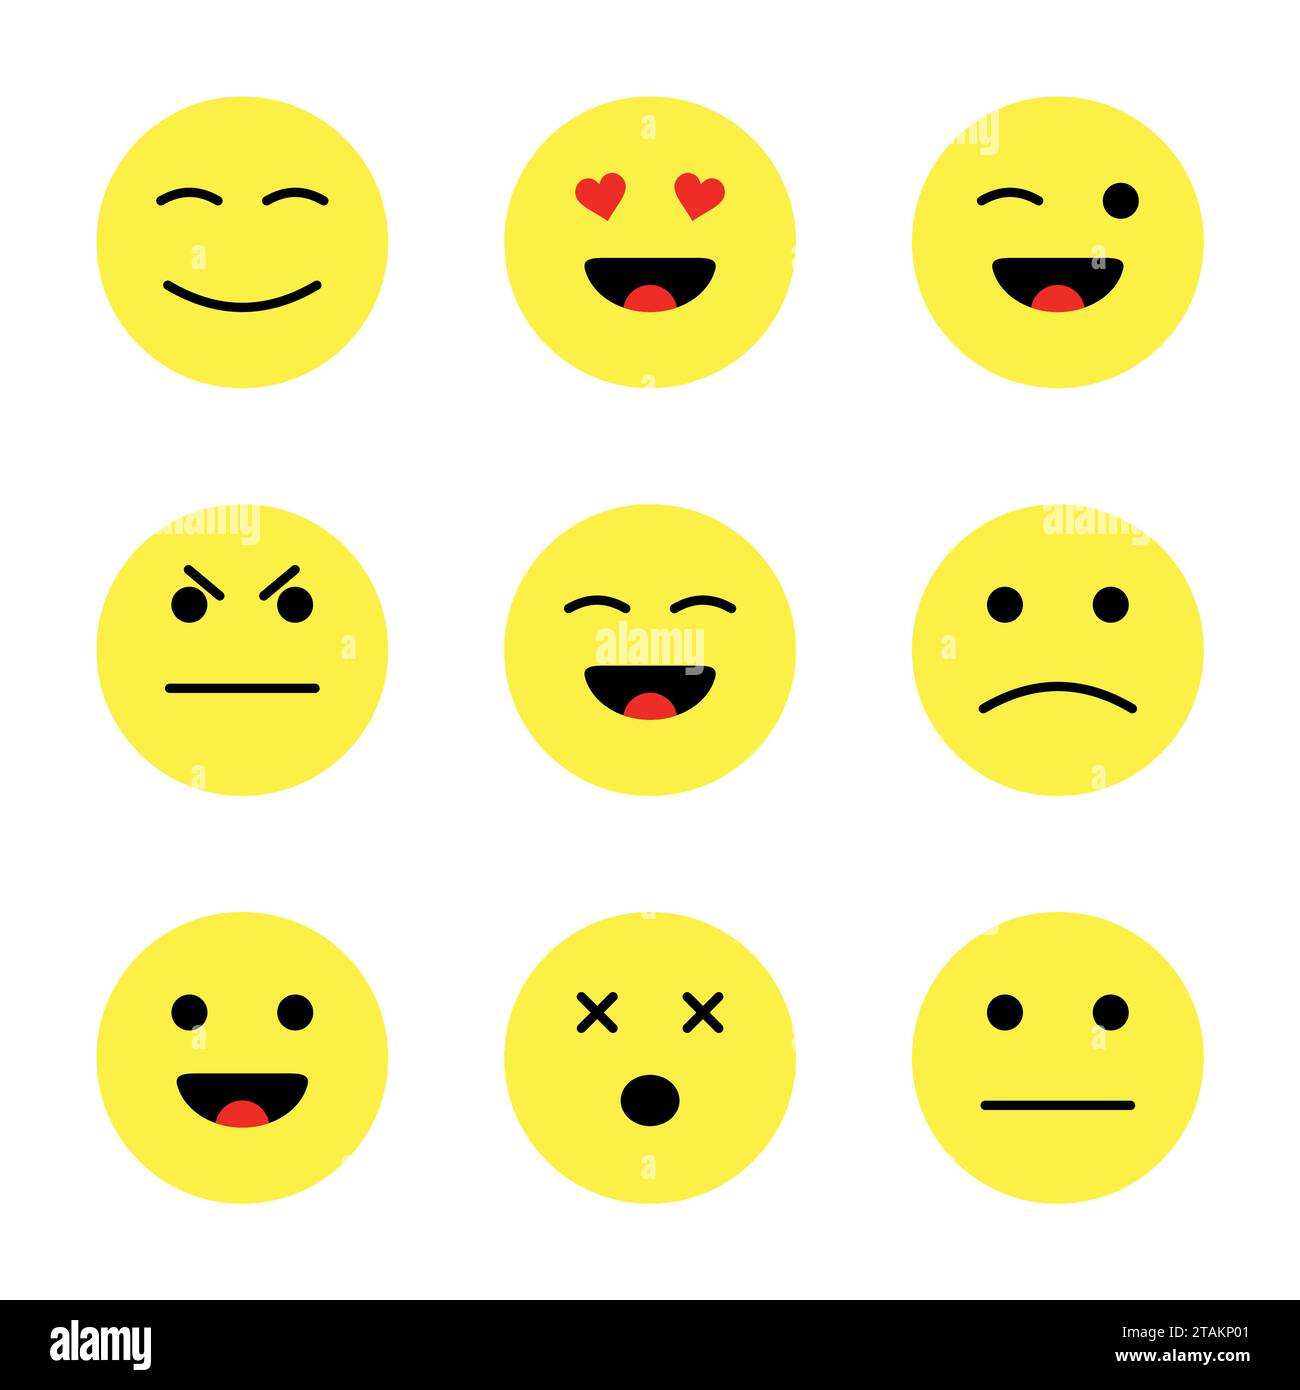 Set of cute smiley emoticons. Cartoon flat style faces smiles isolated on white background. Stock Vector